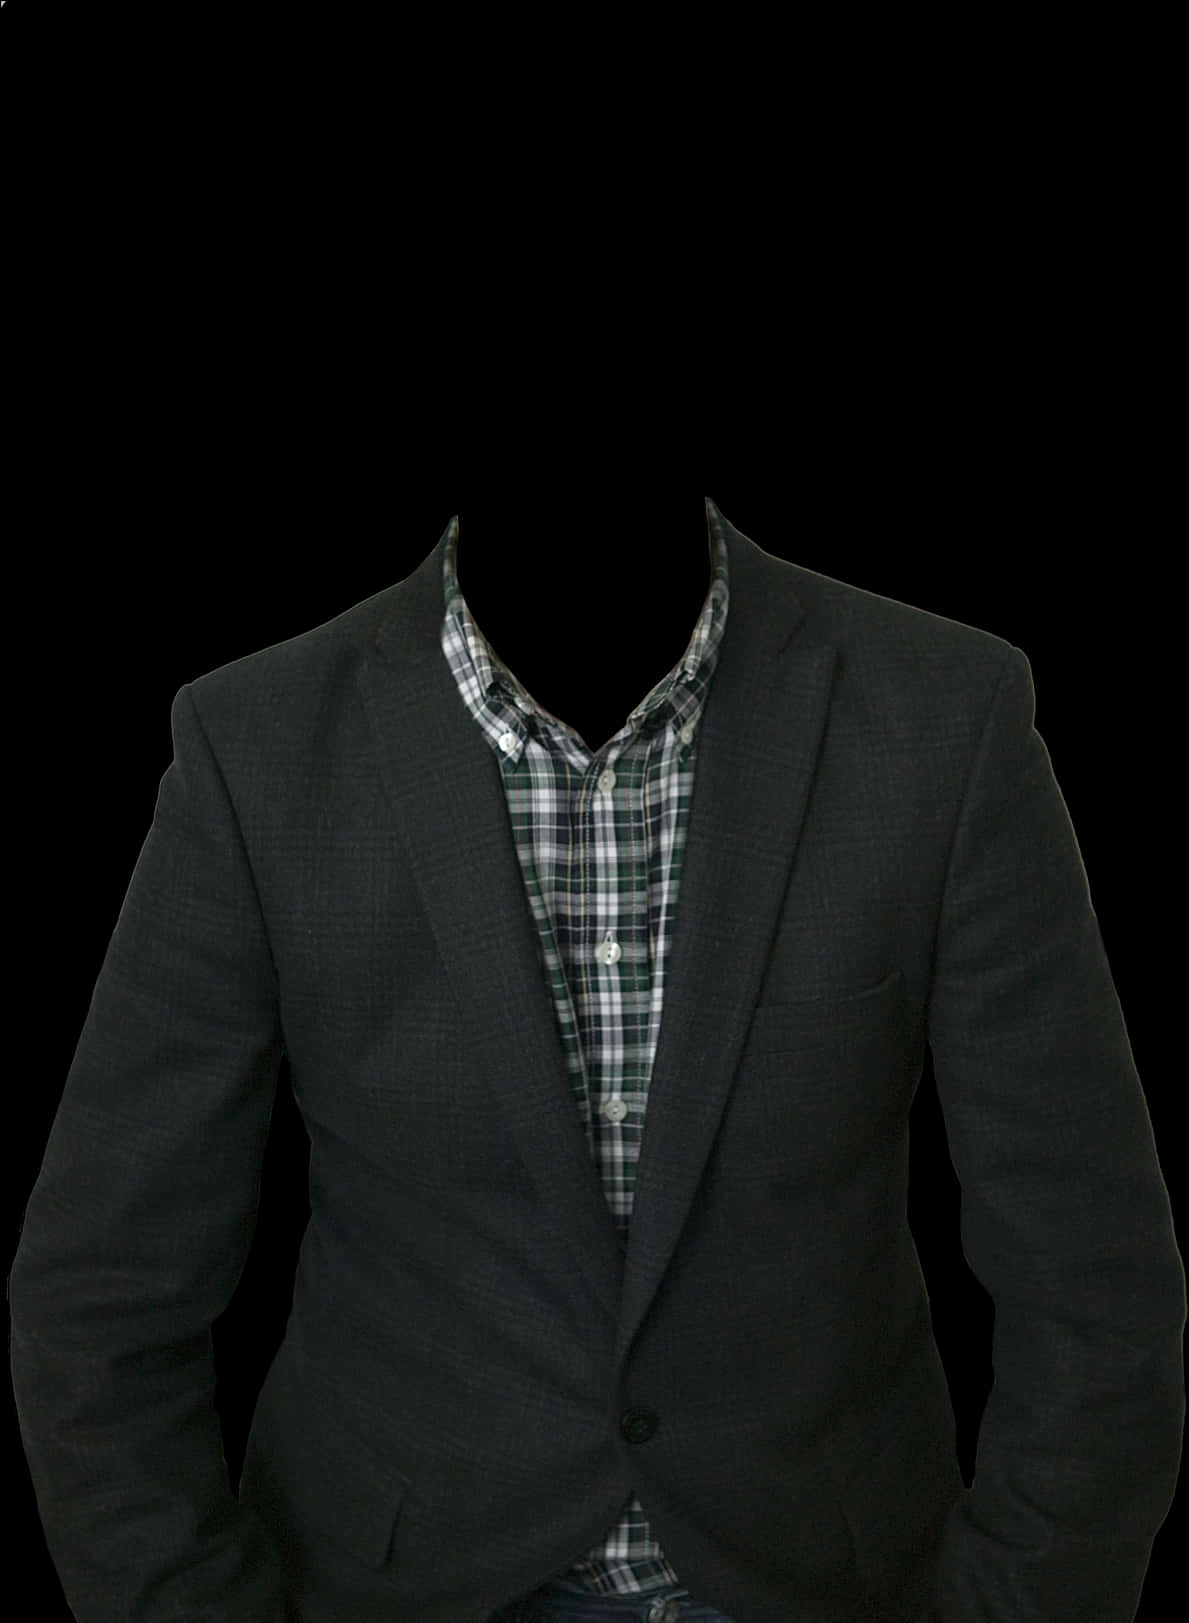 Business Casual Attire Black Background PNG